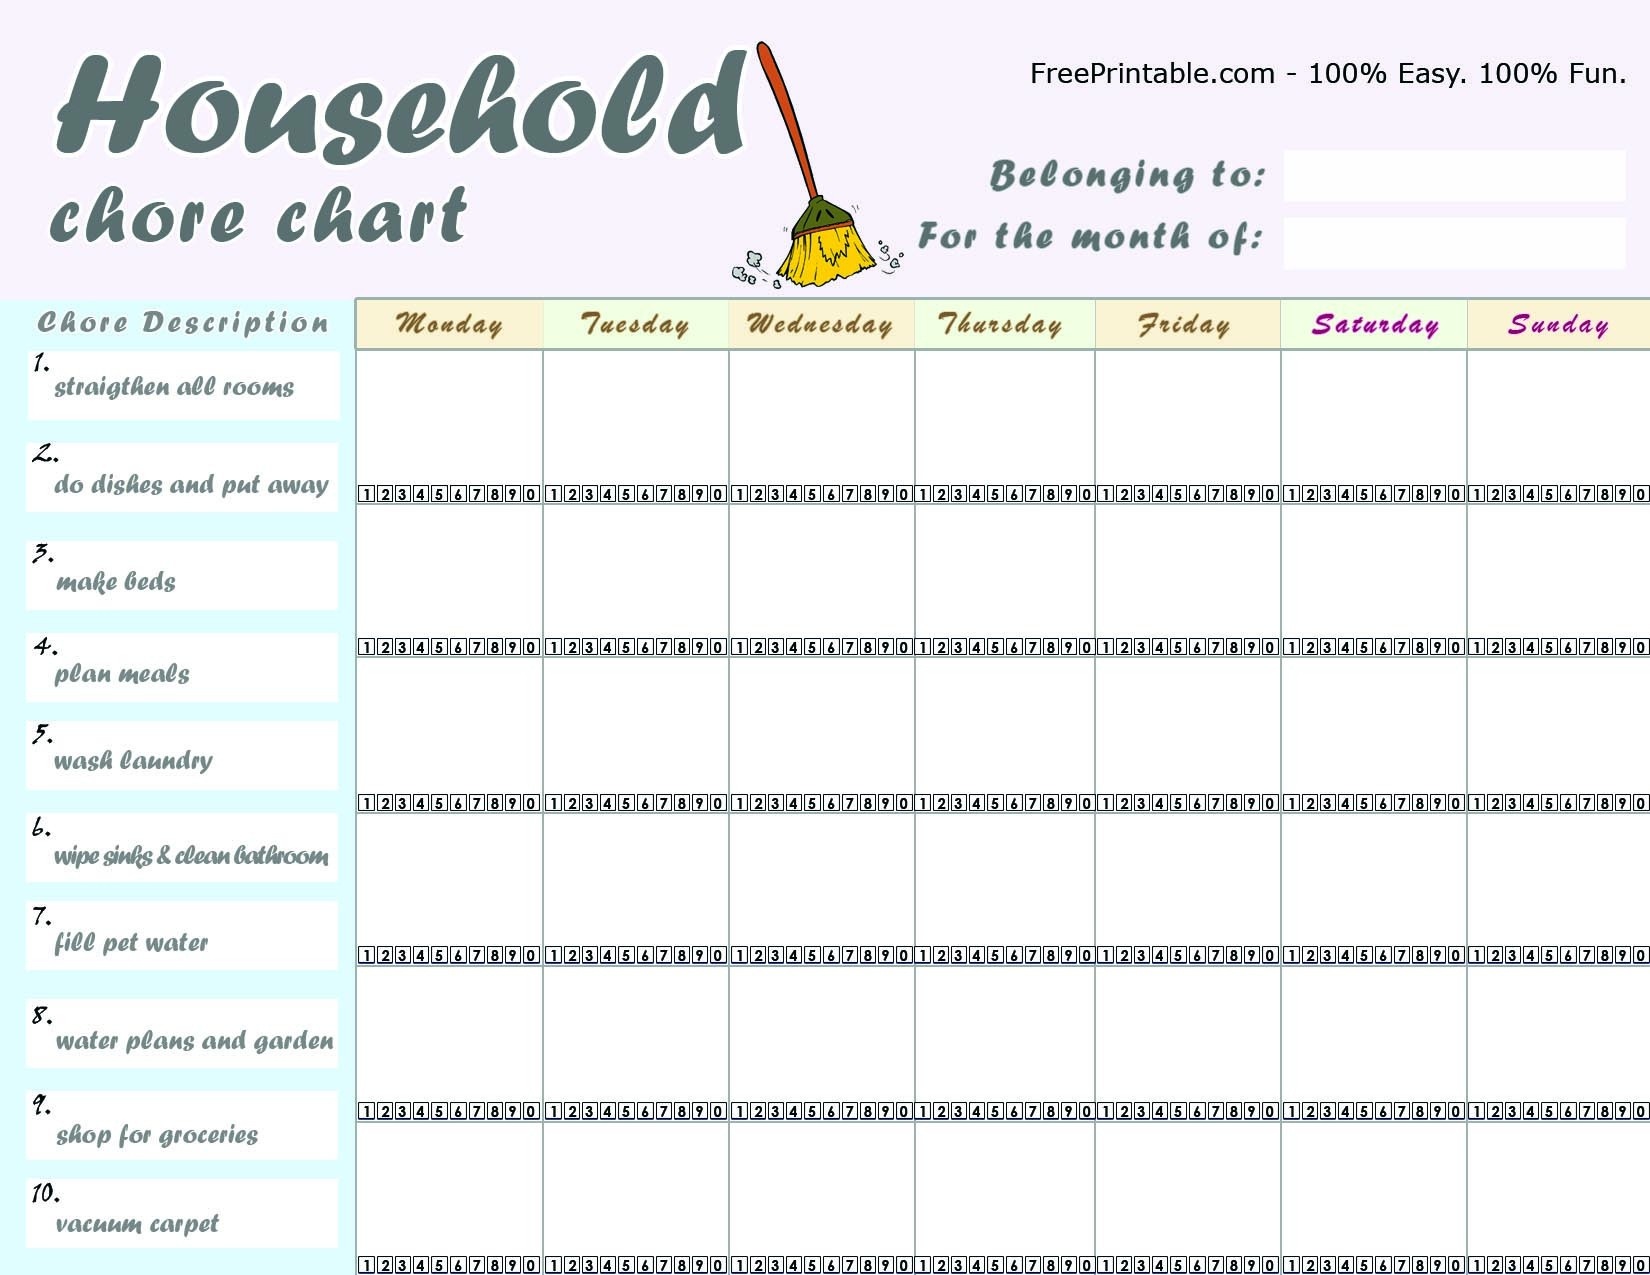  Free Printable Chore Charts For Multiple Children Free Printable